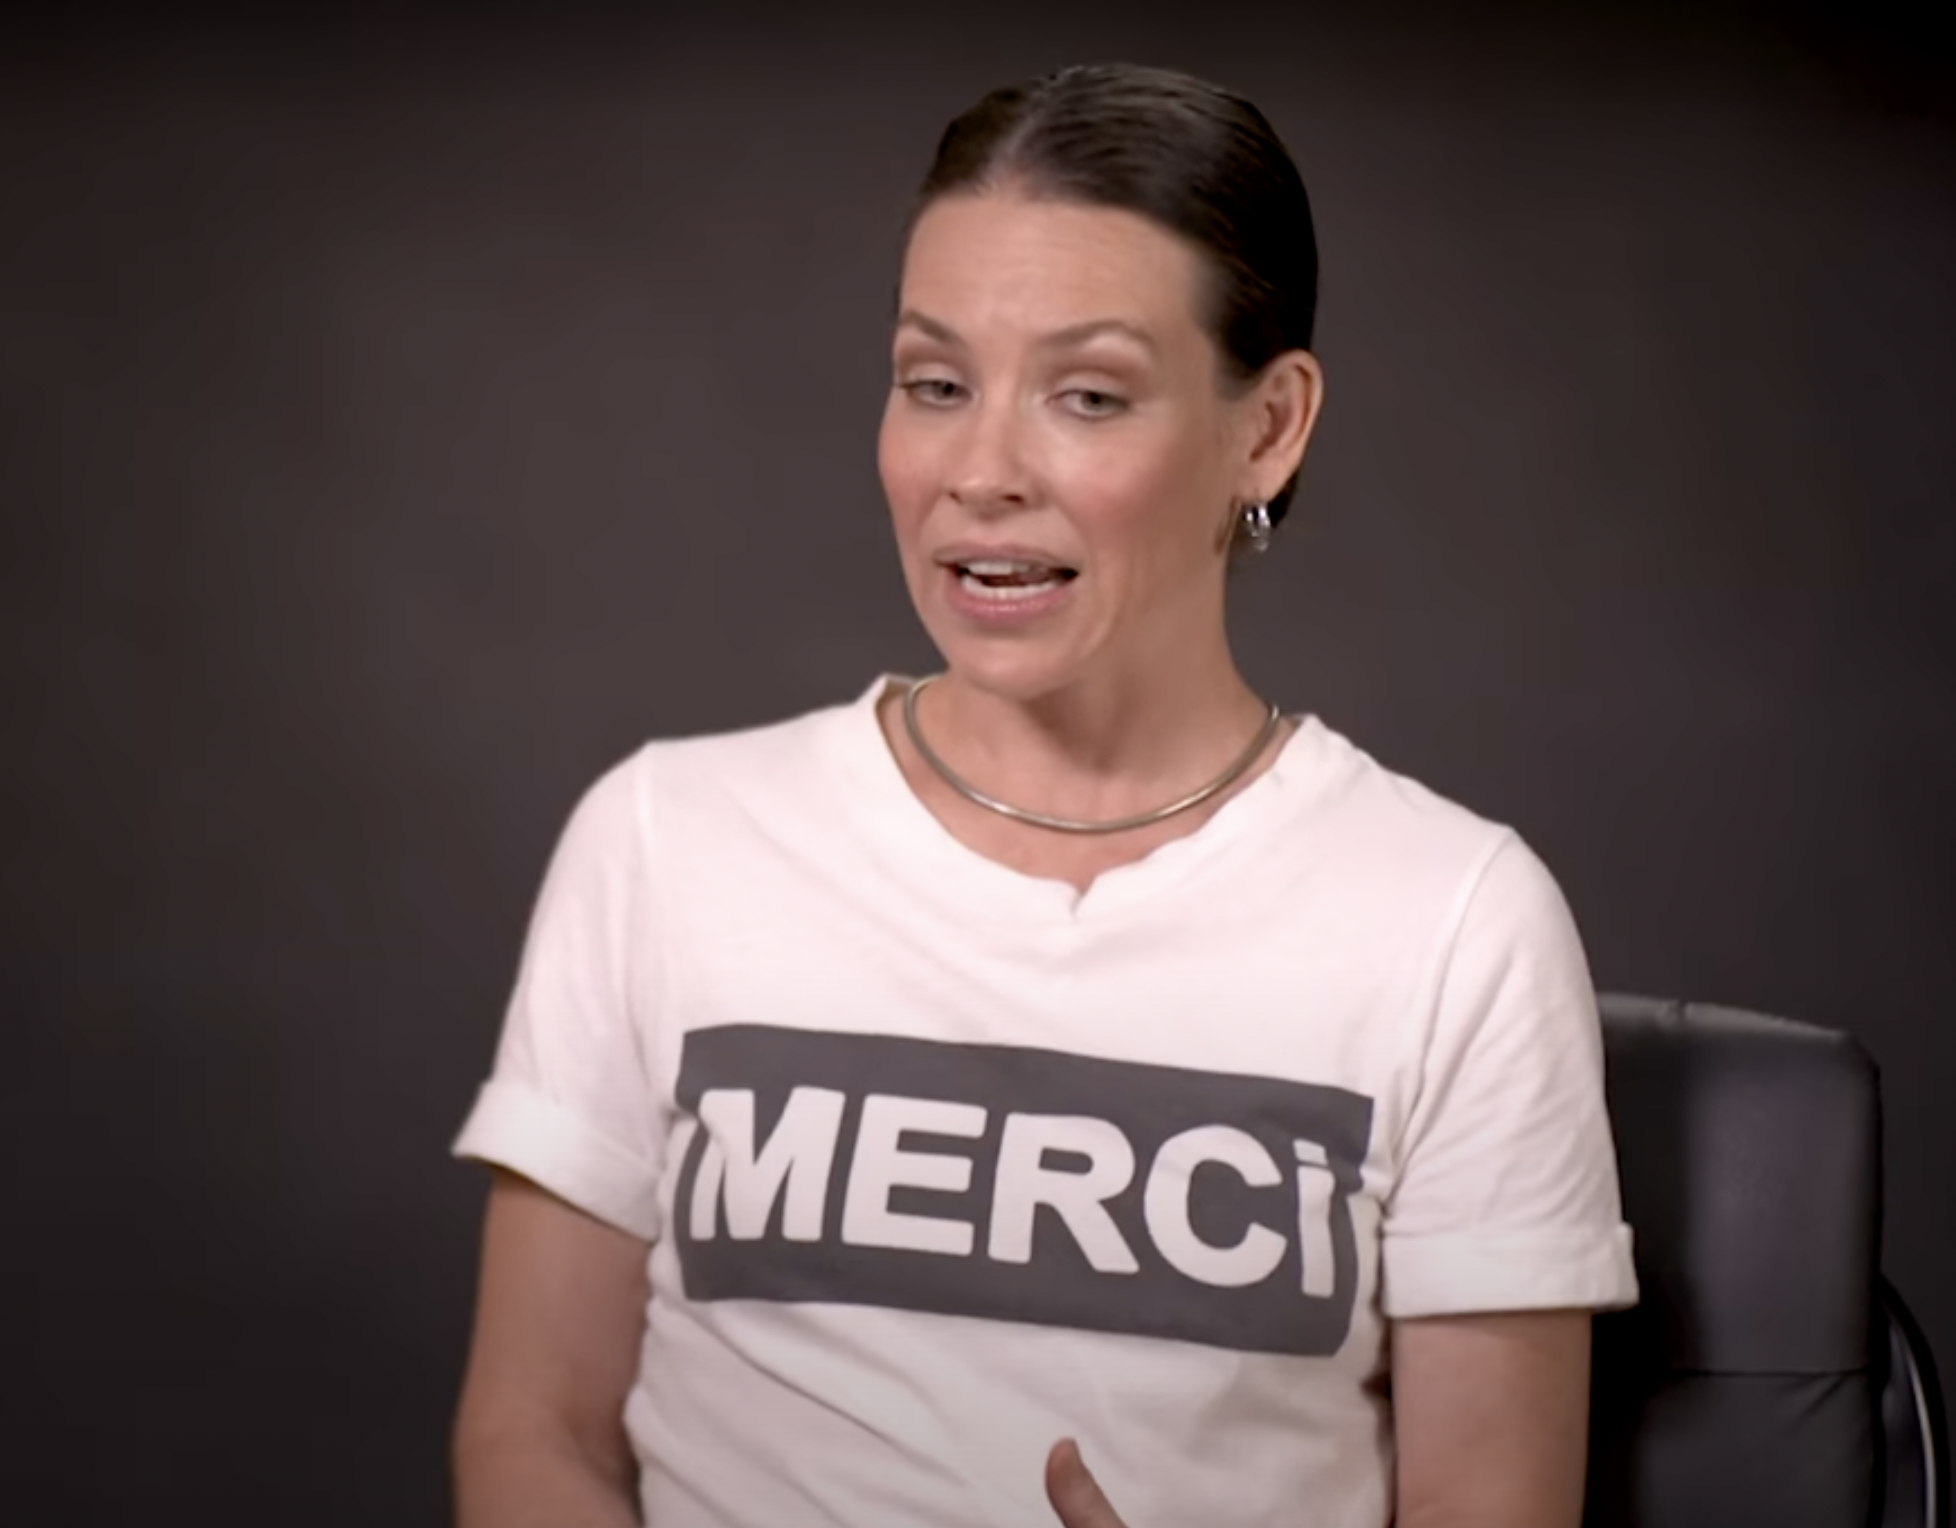 Evangeline Lilly Announces Retirement From Acting Aged 44